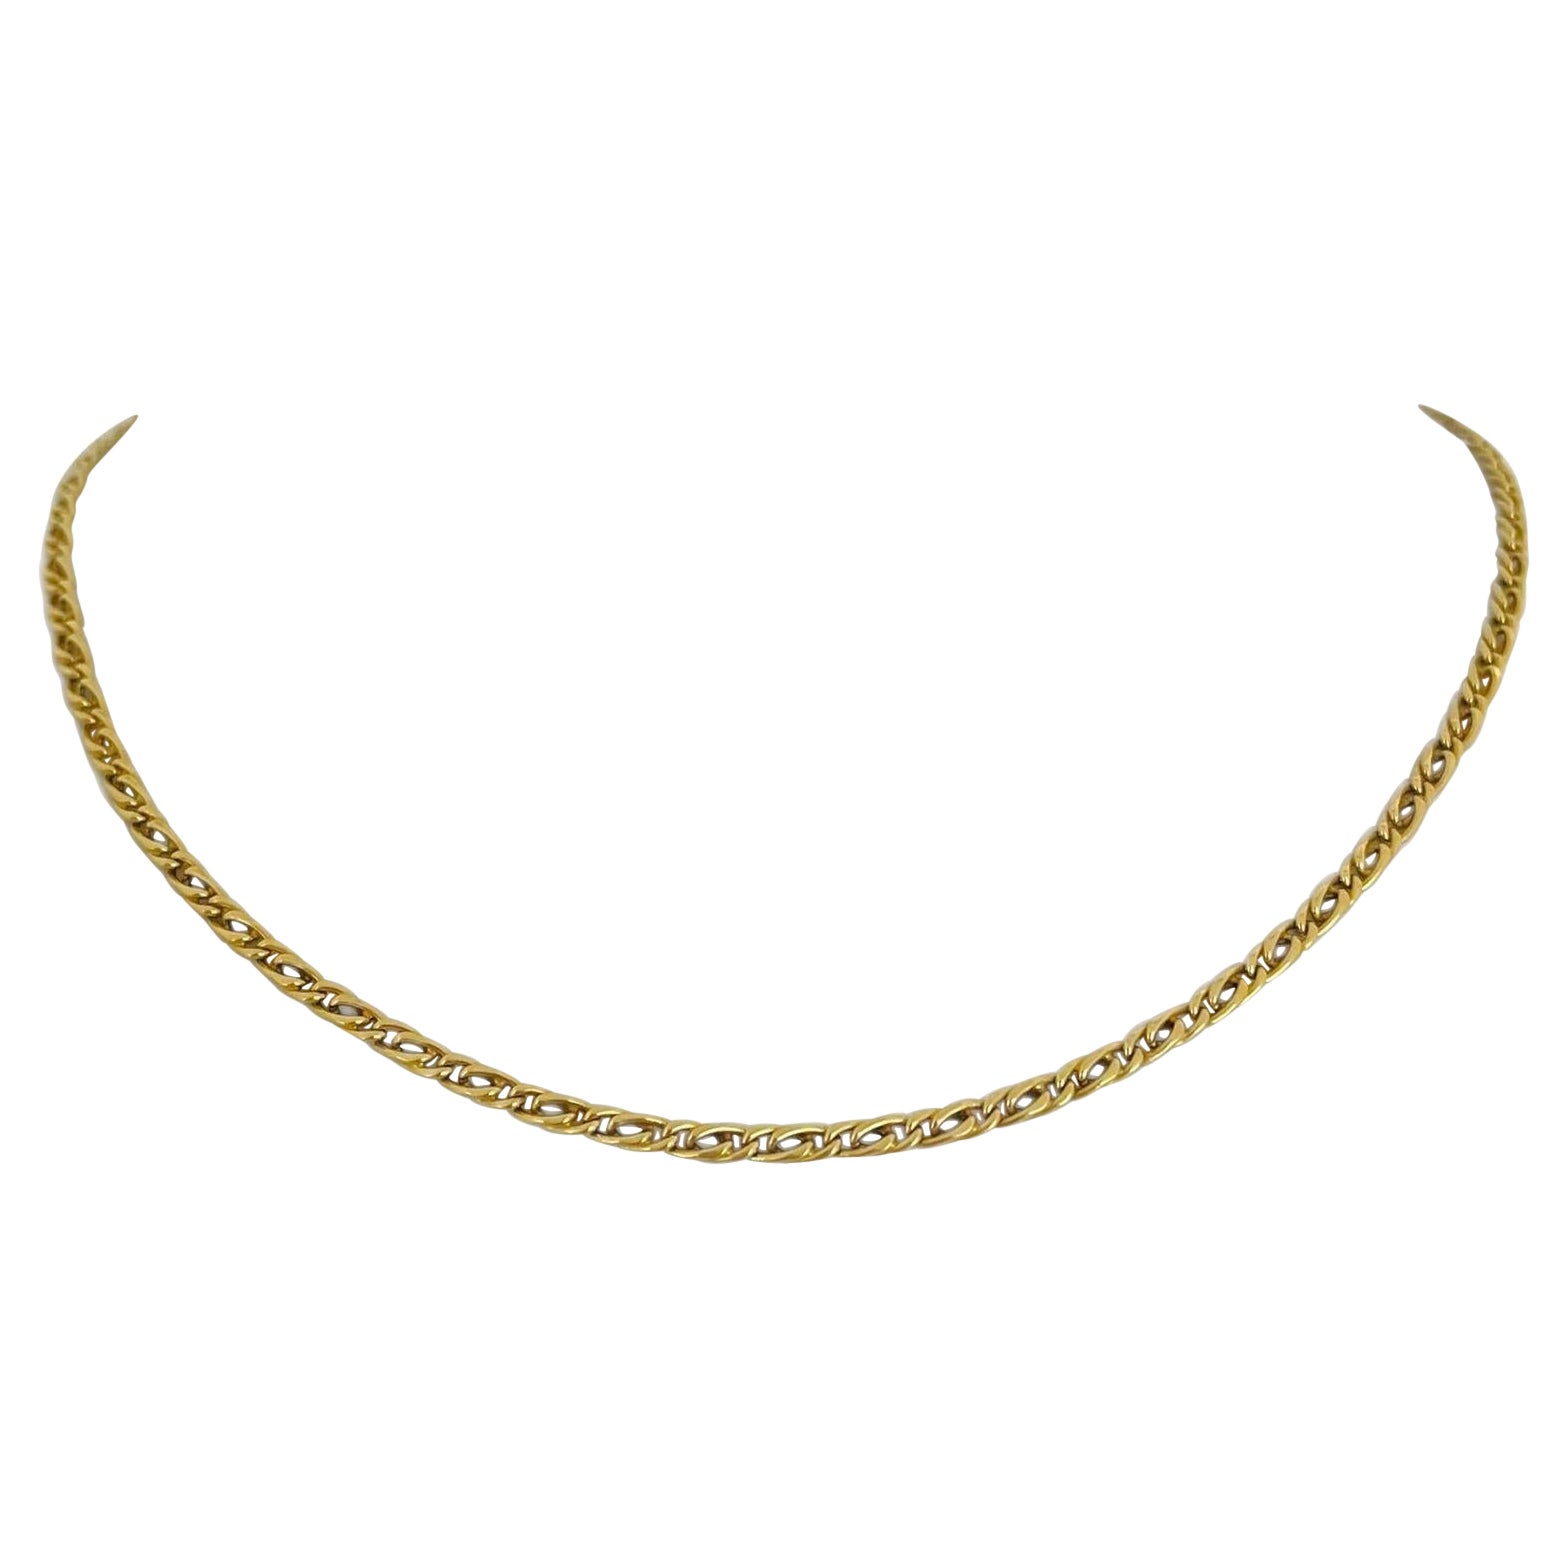 18 Karat Yellow Gold Hollow Ladies Fancy Double Curb Link Necklace, Italy